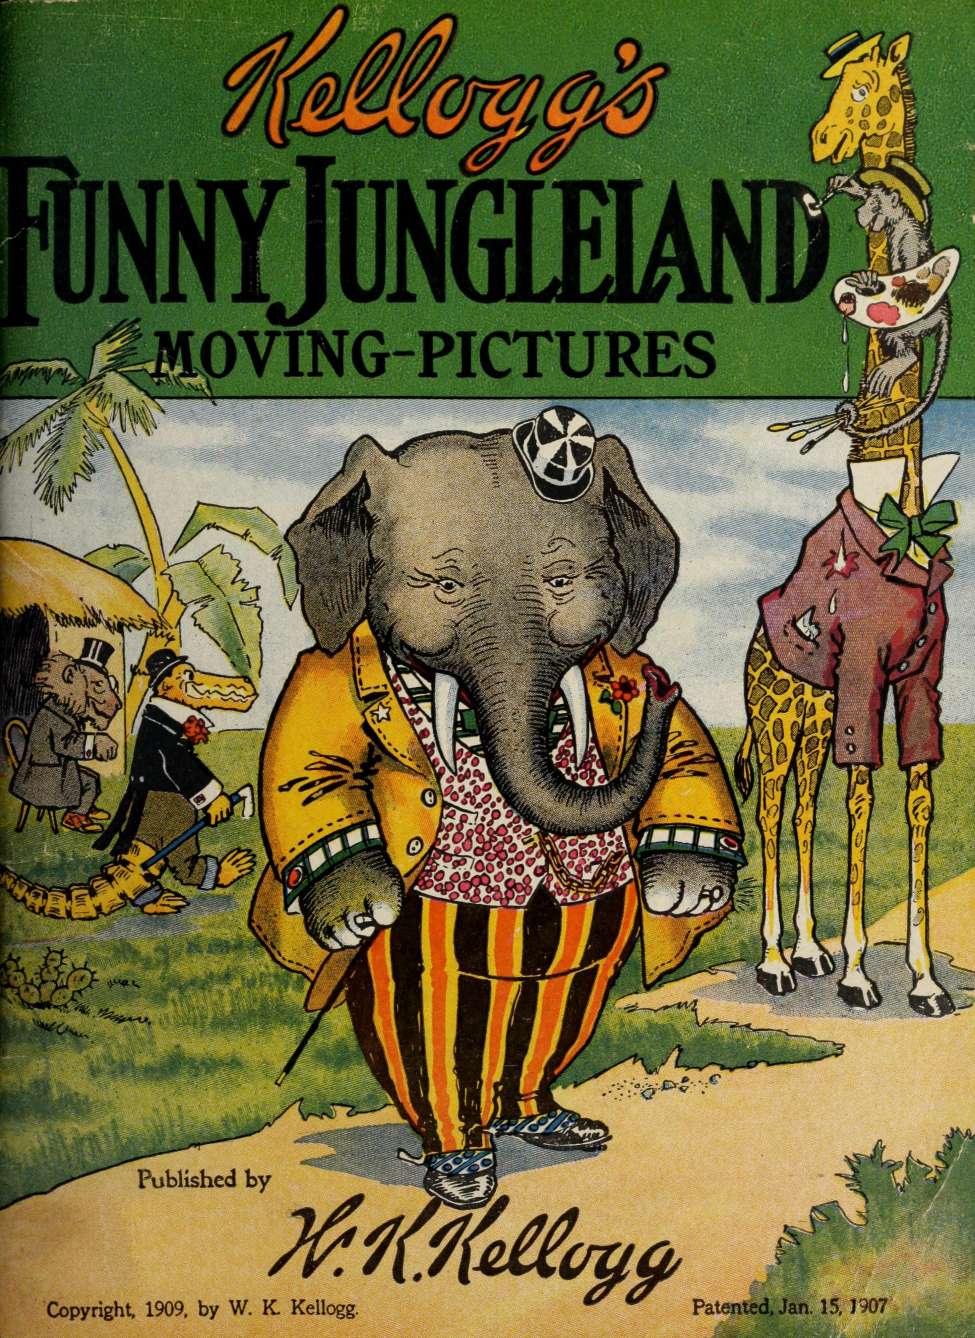 Comic Book Cover For Kellogg's Funny Jungleland Moving-Pictures